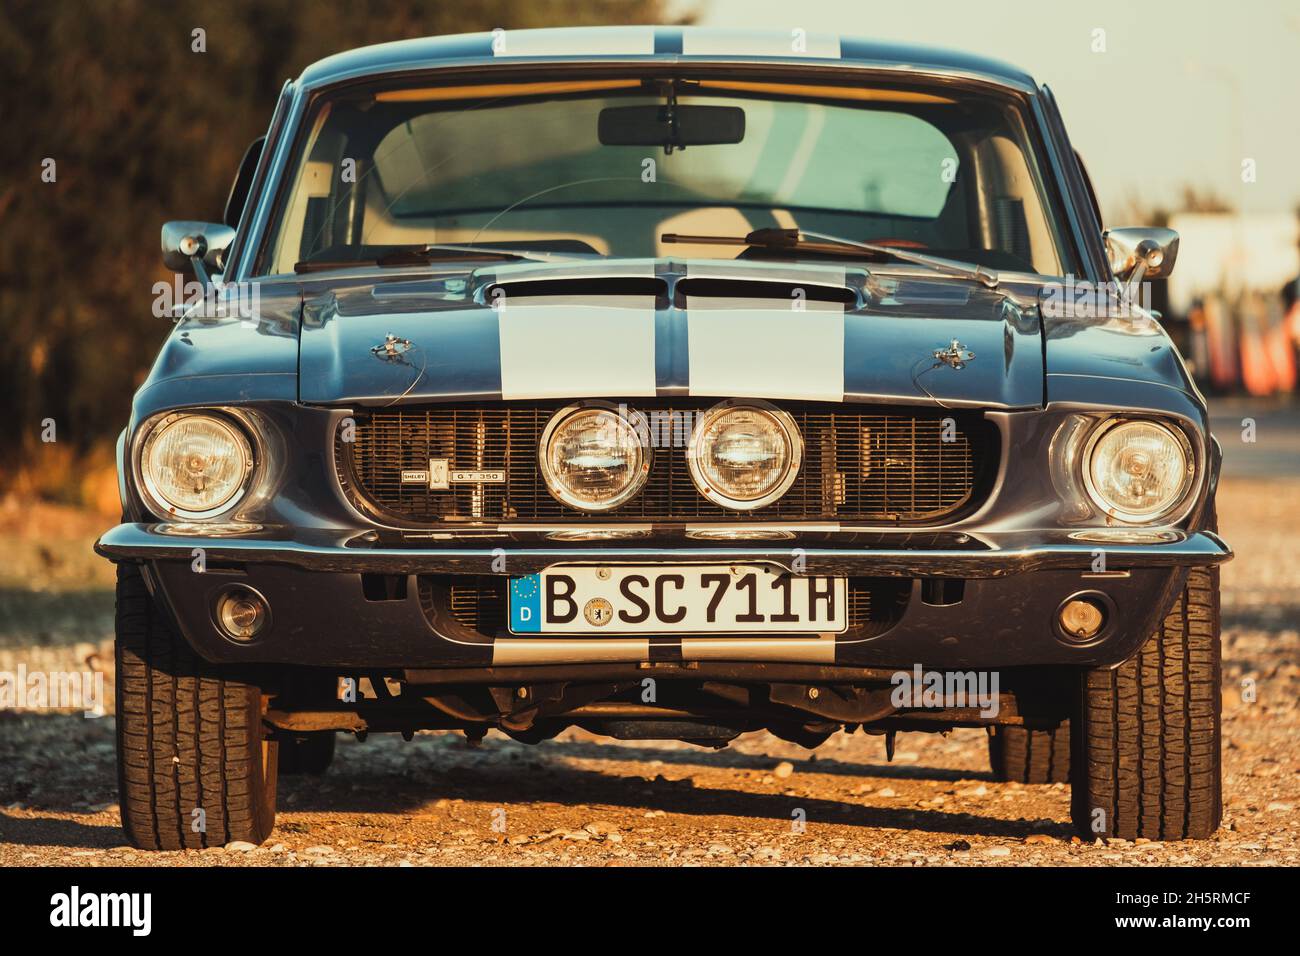 1967 Ford Shelby Mustang GT 350 Stockfotografie - Alamy